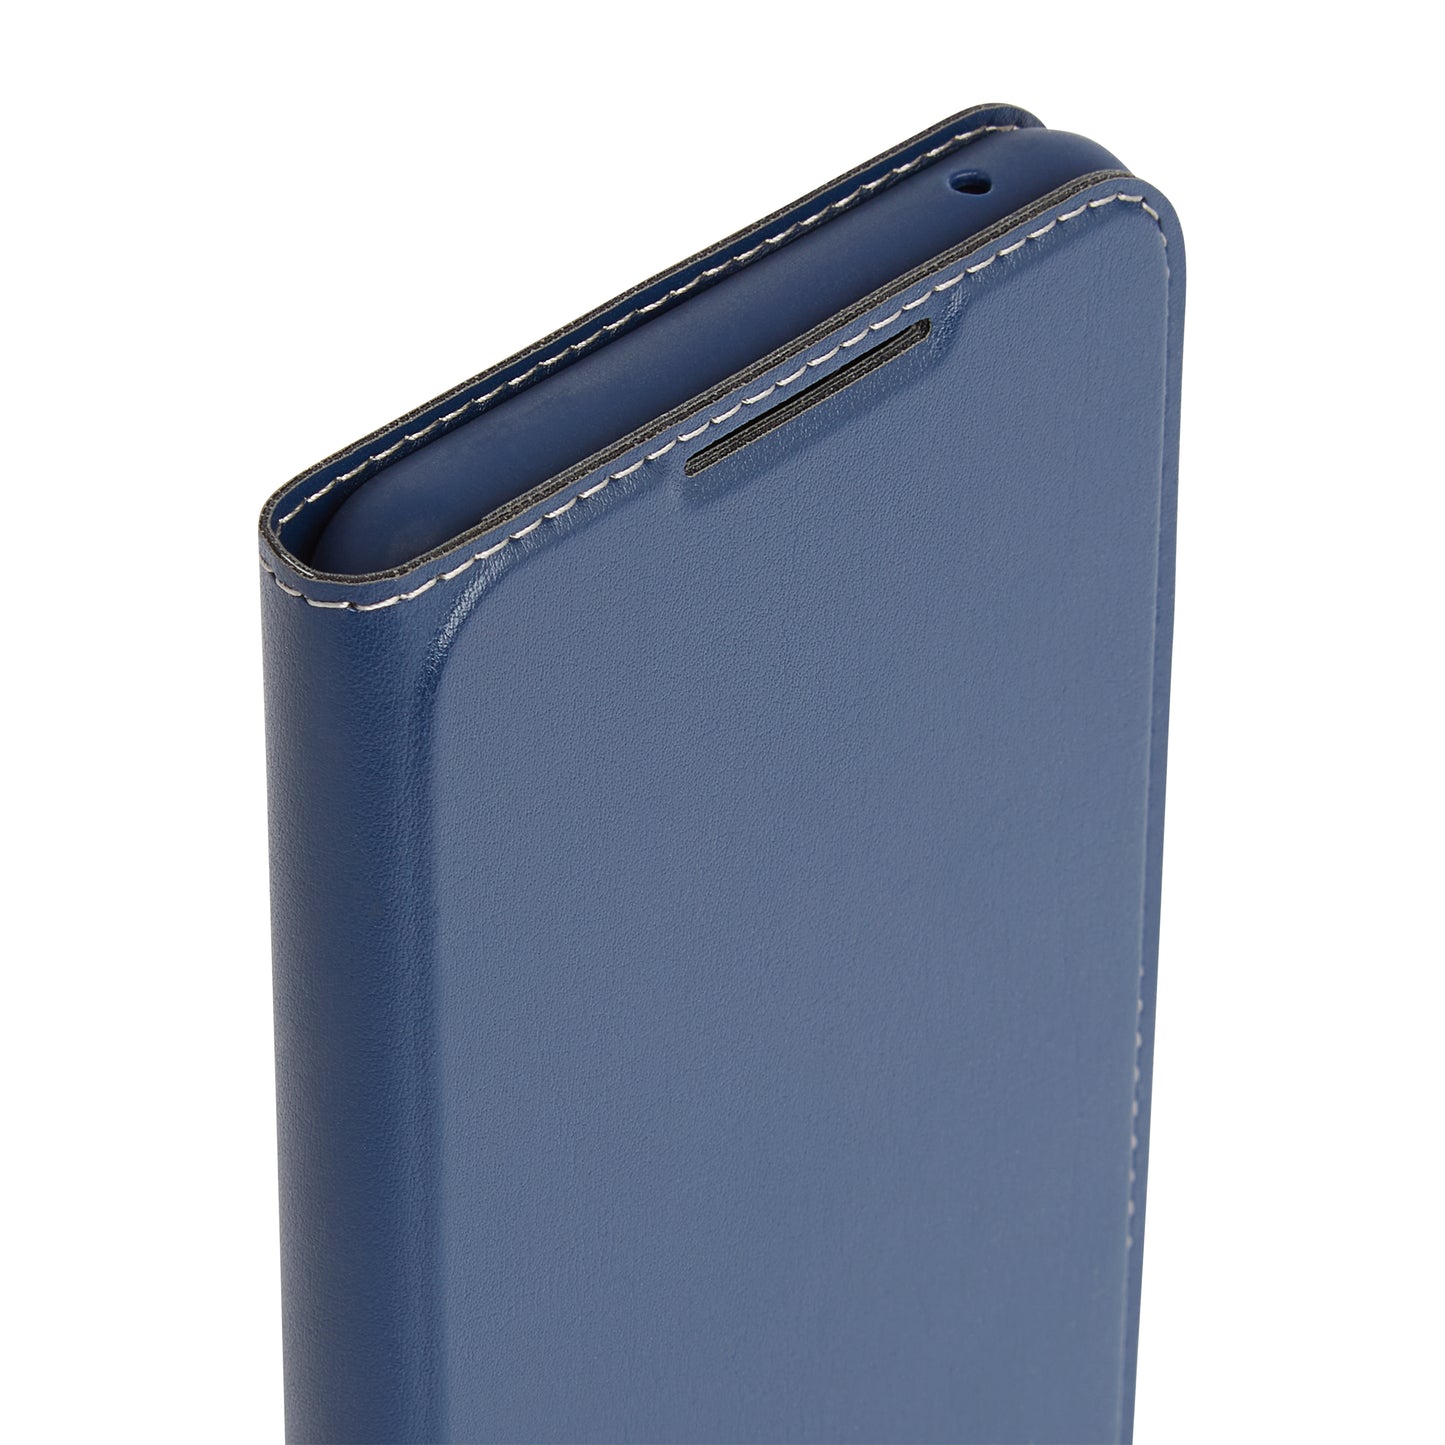 Wallet Cover - OPPO Find X2 Lite